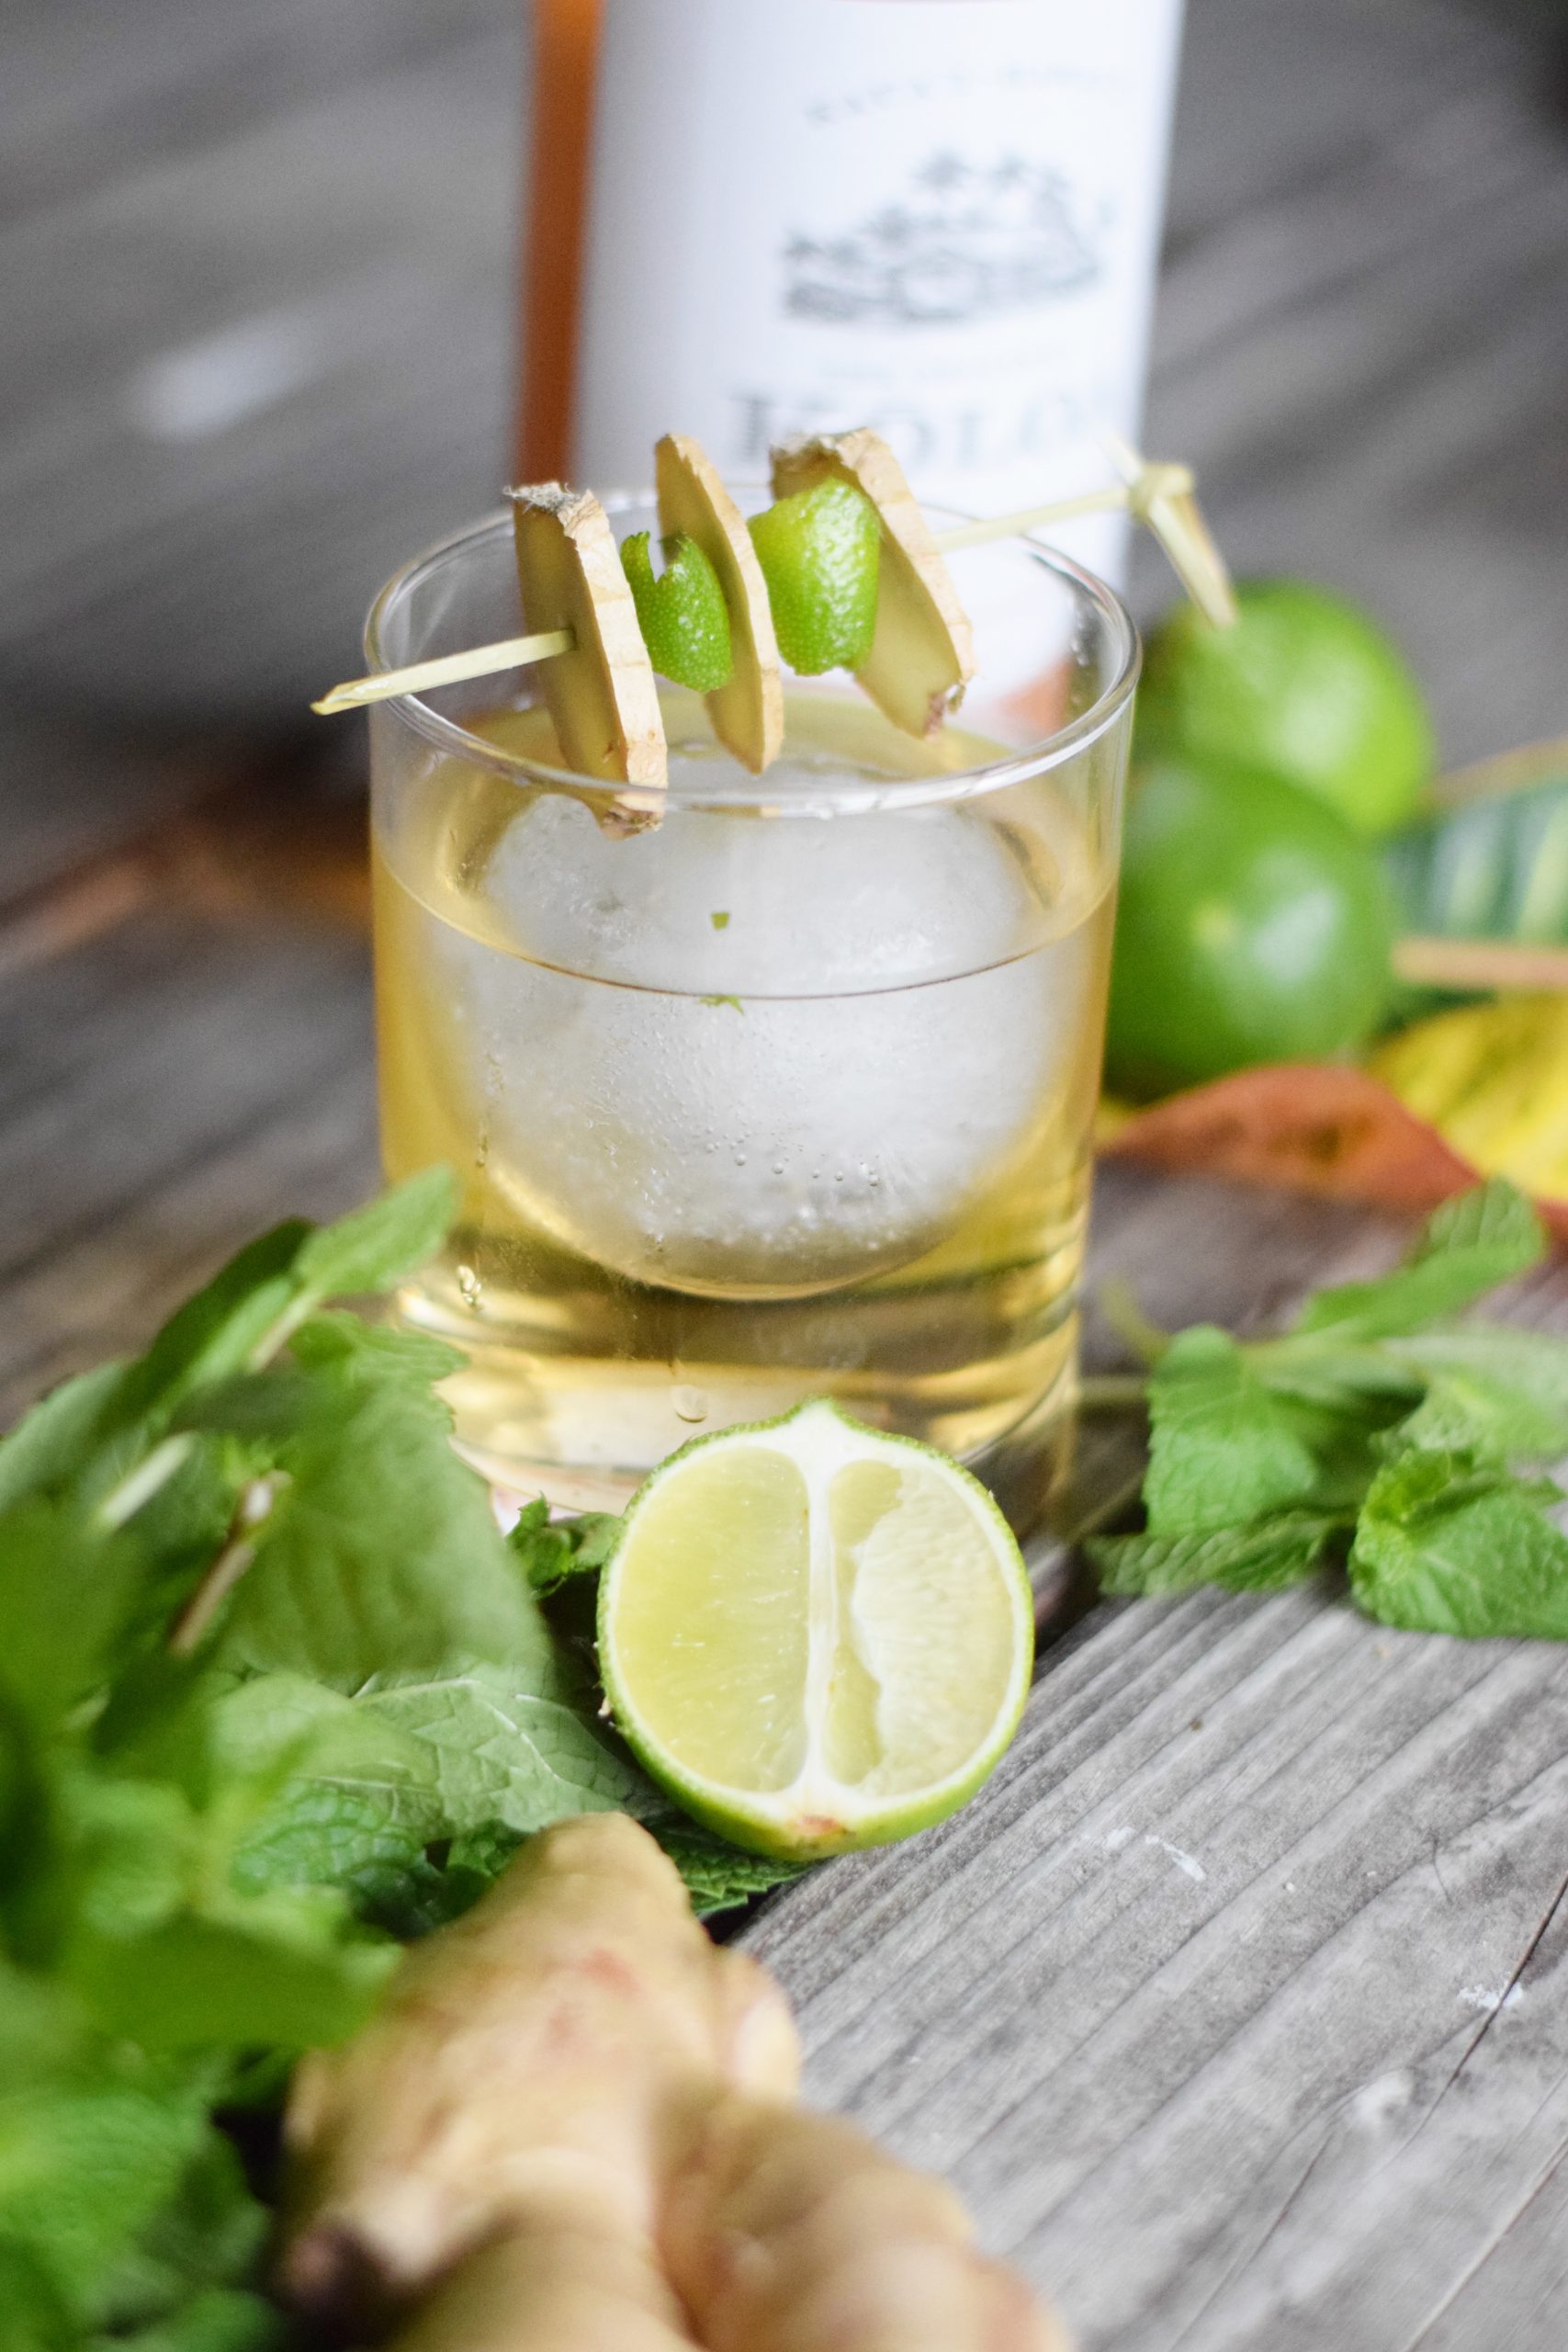 Spicy Ginger Mule Cocktail With Kōloa Rum — A refreshing twist on a classic Moscow Mule featuring Kōloa Spiced Rum, local ginger beer and infused with hints of mint and lime! | Moscow Mule Recipe - Ginger Beer Cocktail Recipes - Ginger Beer Cocktail - Cocktail with Kōloa Rum - Ginger Mule recipe 